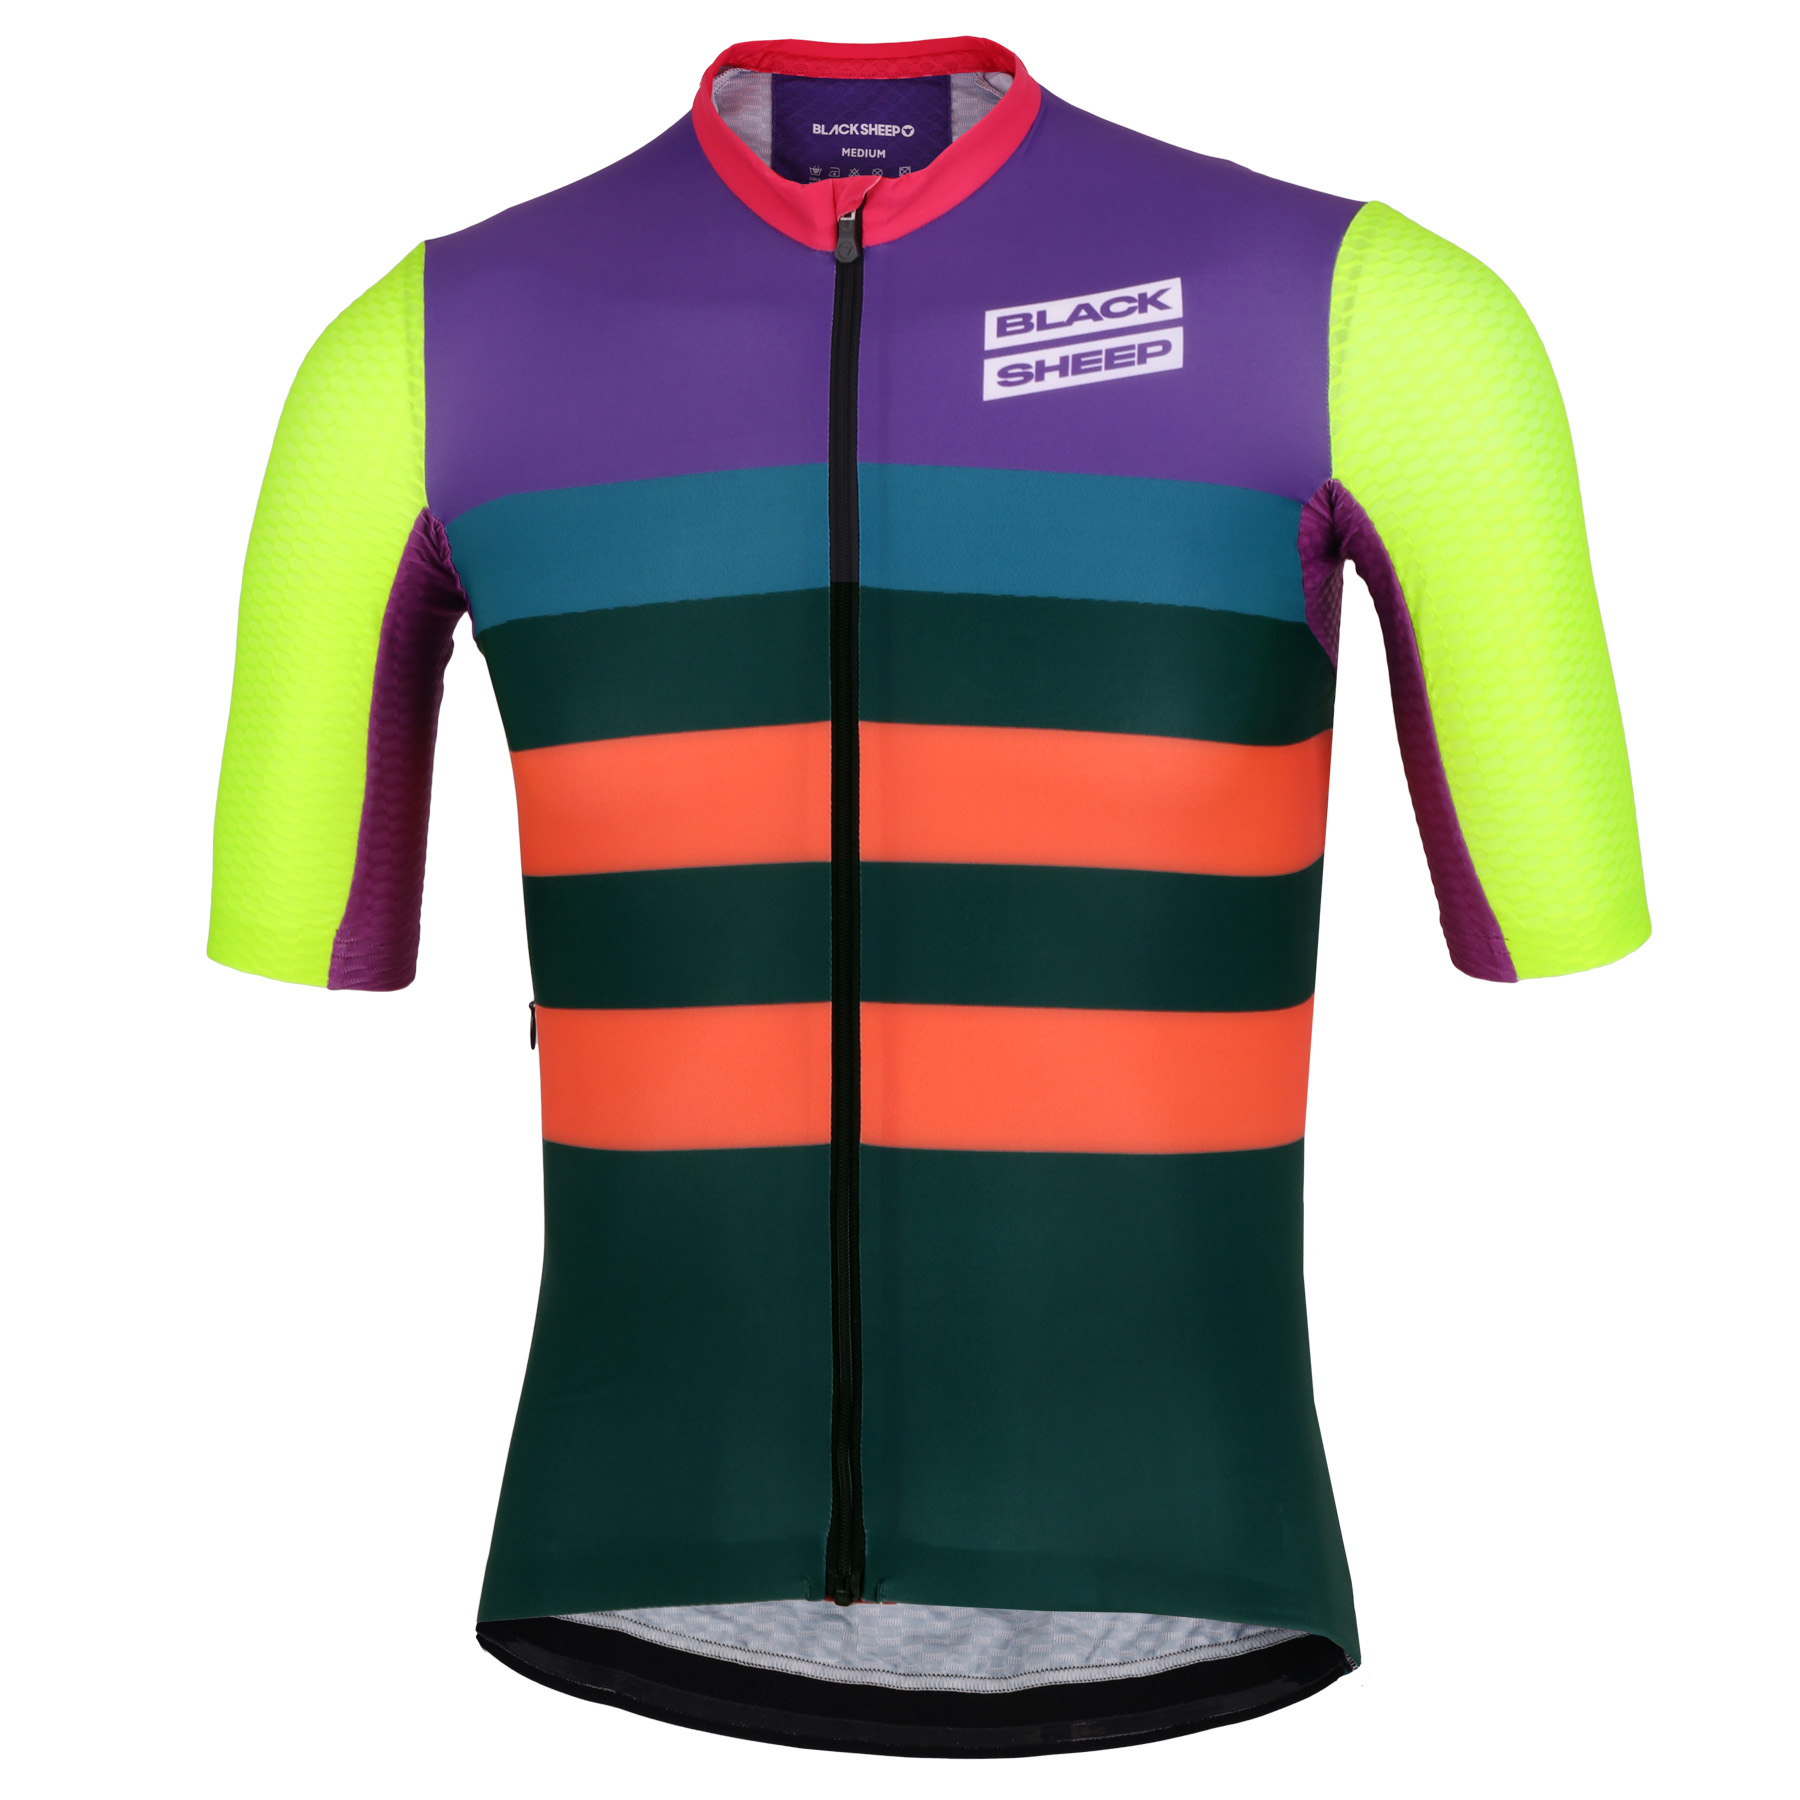 Picture of Black Sheep Cycling Racing Aero Short Sleeve Jersey 2.0 - Flanders Monument